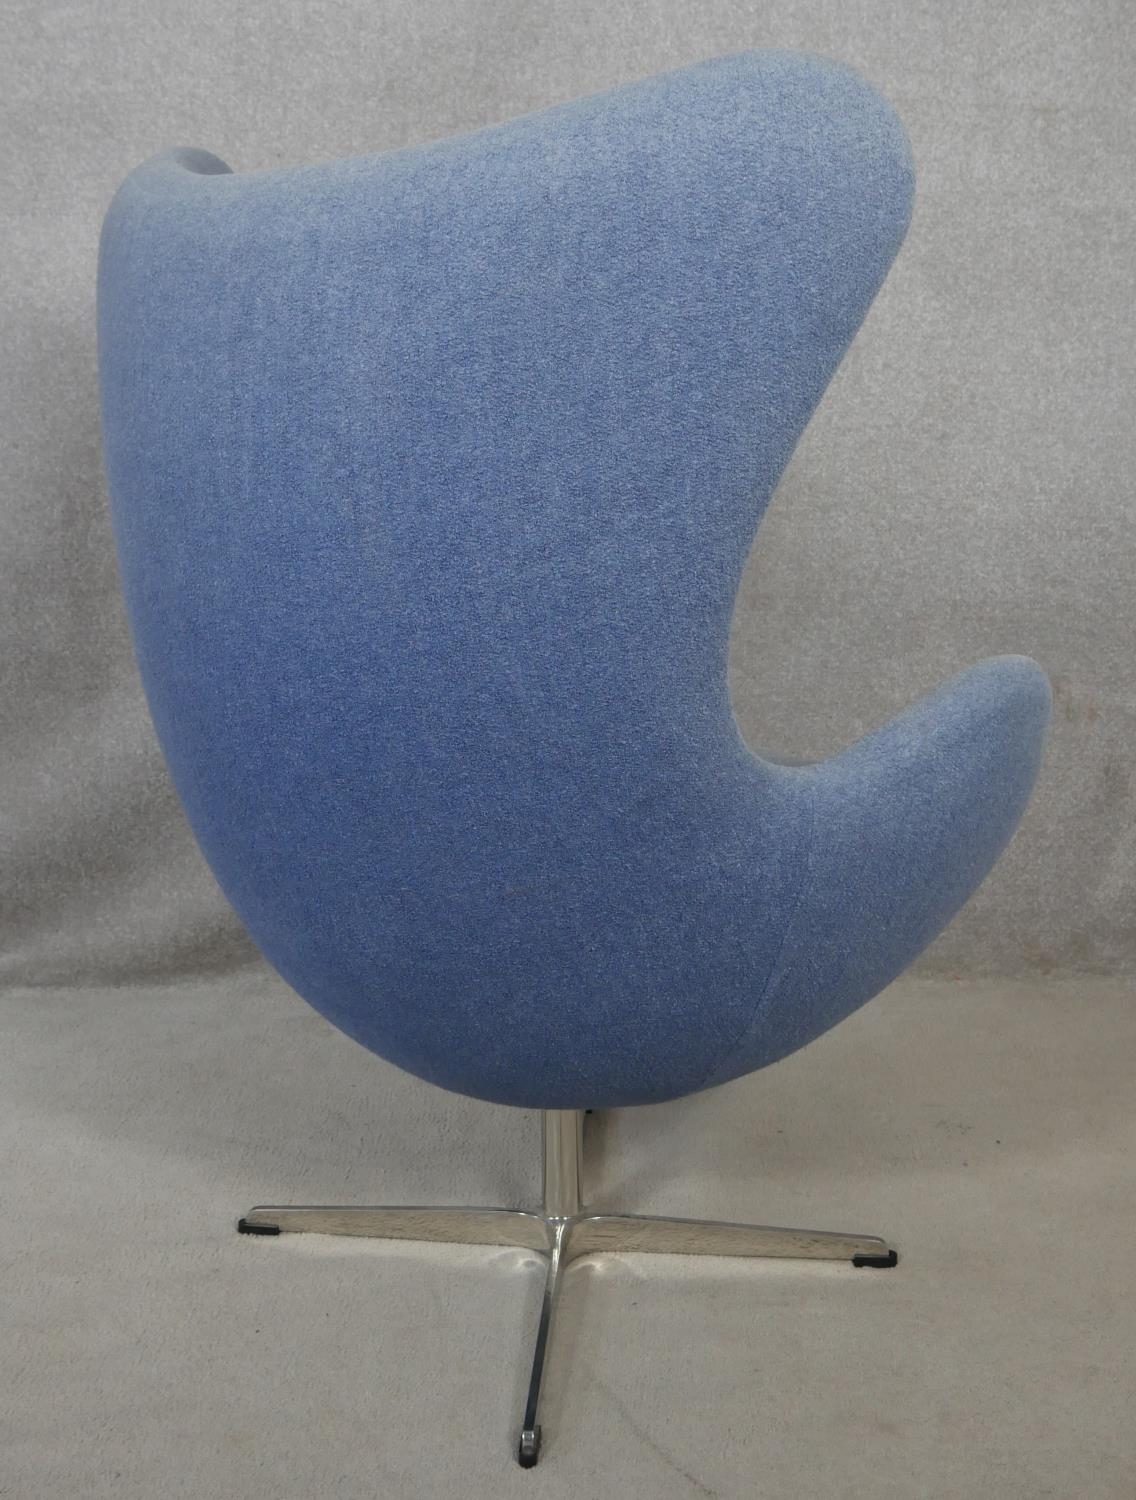 After Arne Jacobsen (1902-1971) Egg chair in pale blue upholstery and rise and fall action on four - Image 3 of 4